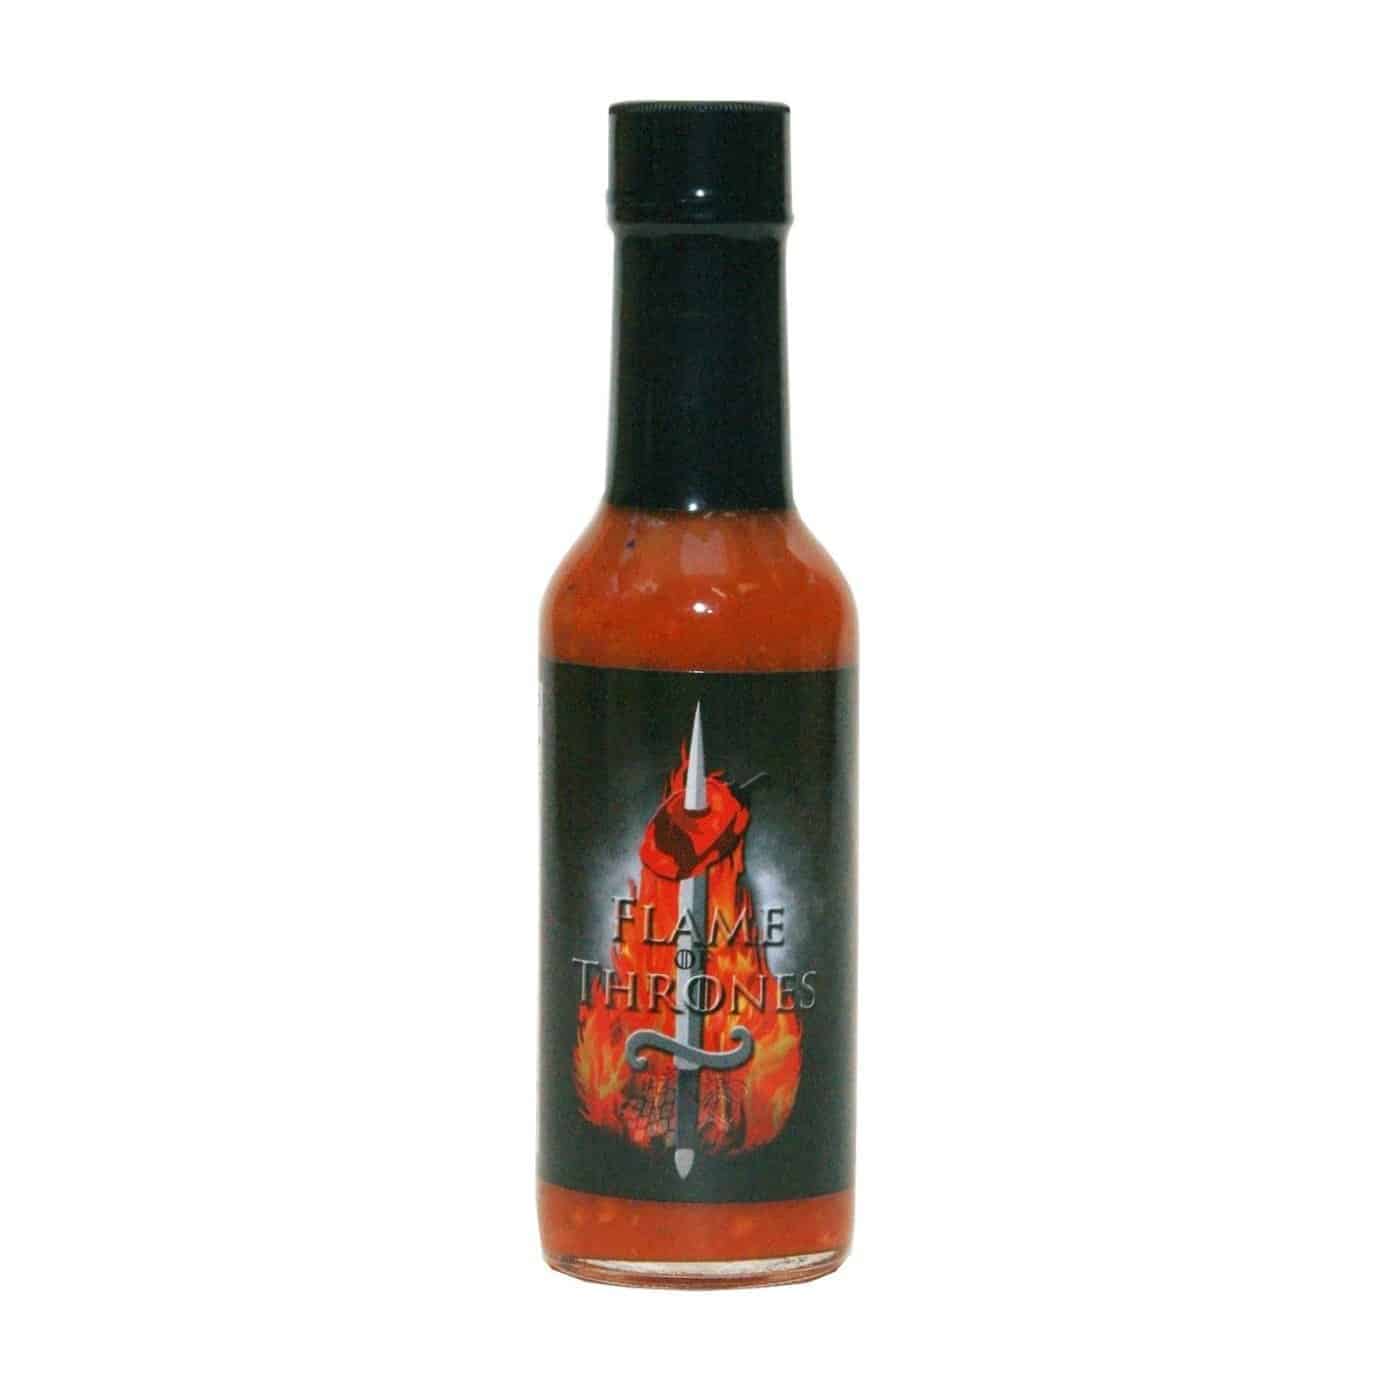 Flame of Thrones Hot Sauce